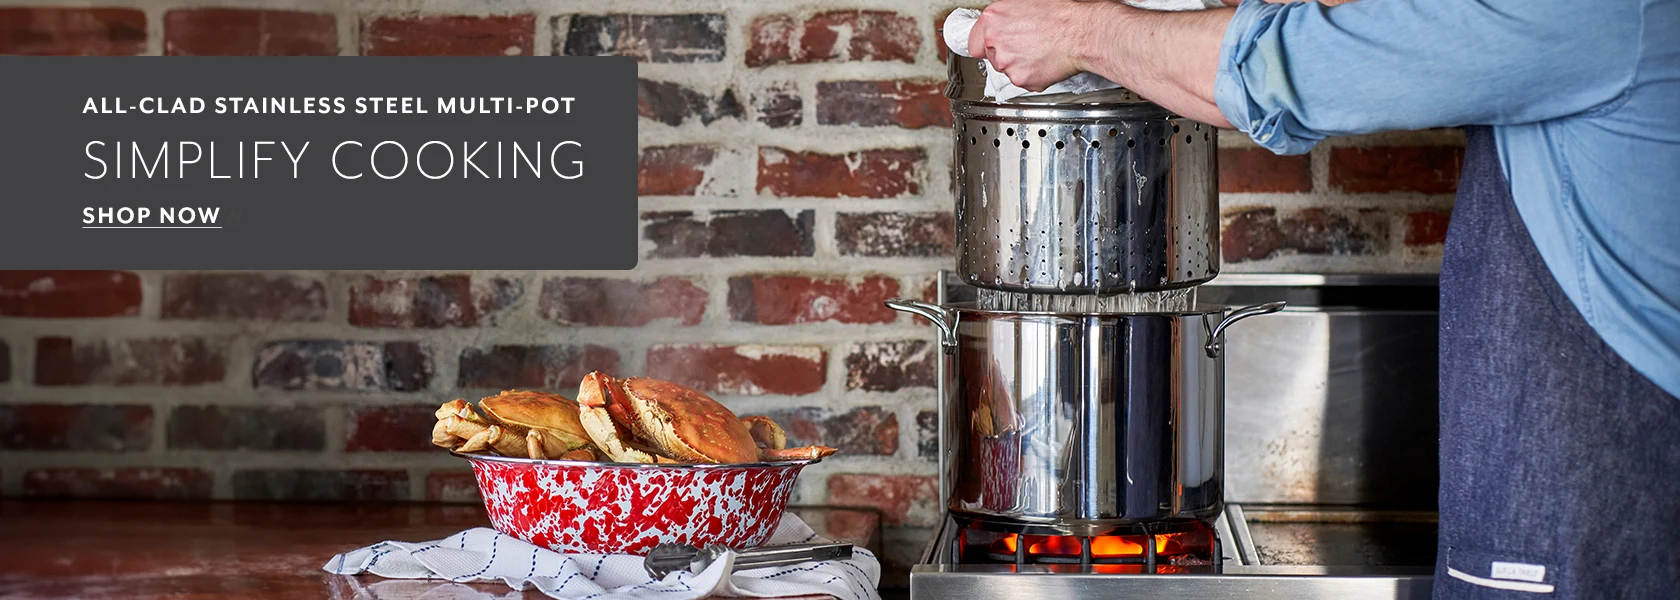 All-Clad Stainless Steel Multi-Pot. Simplify cooking, shop now.